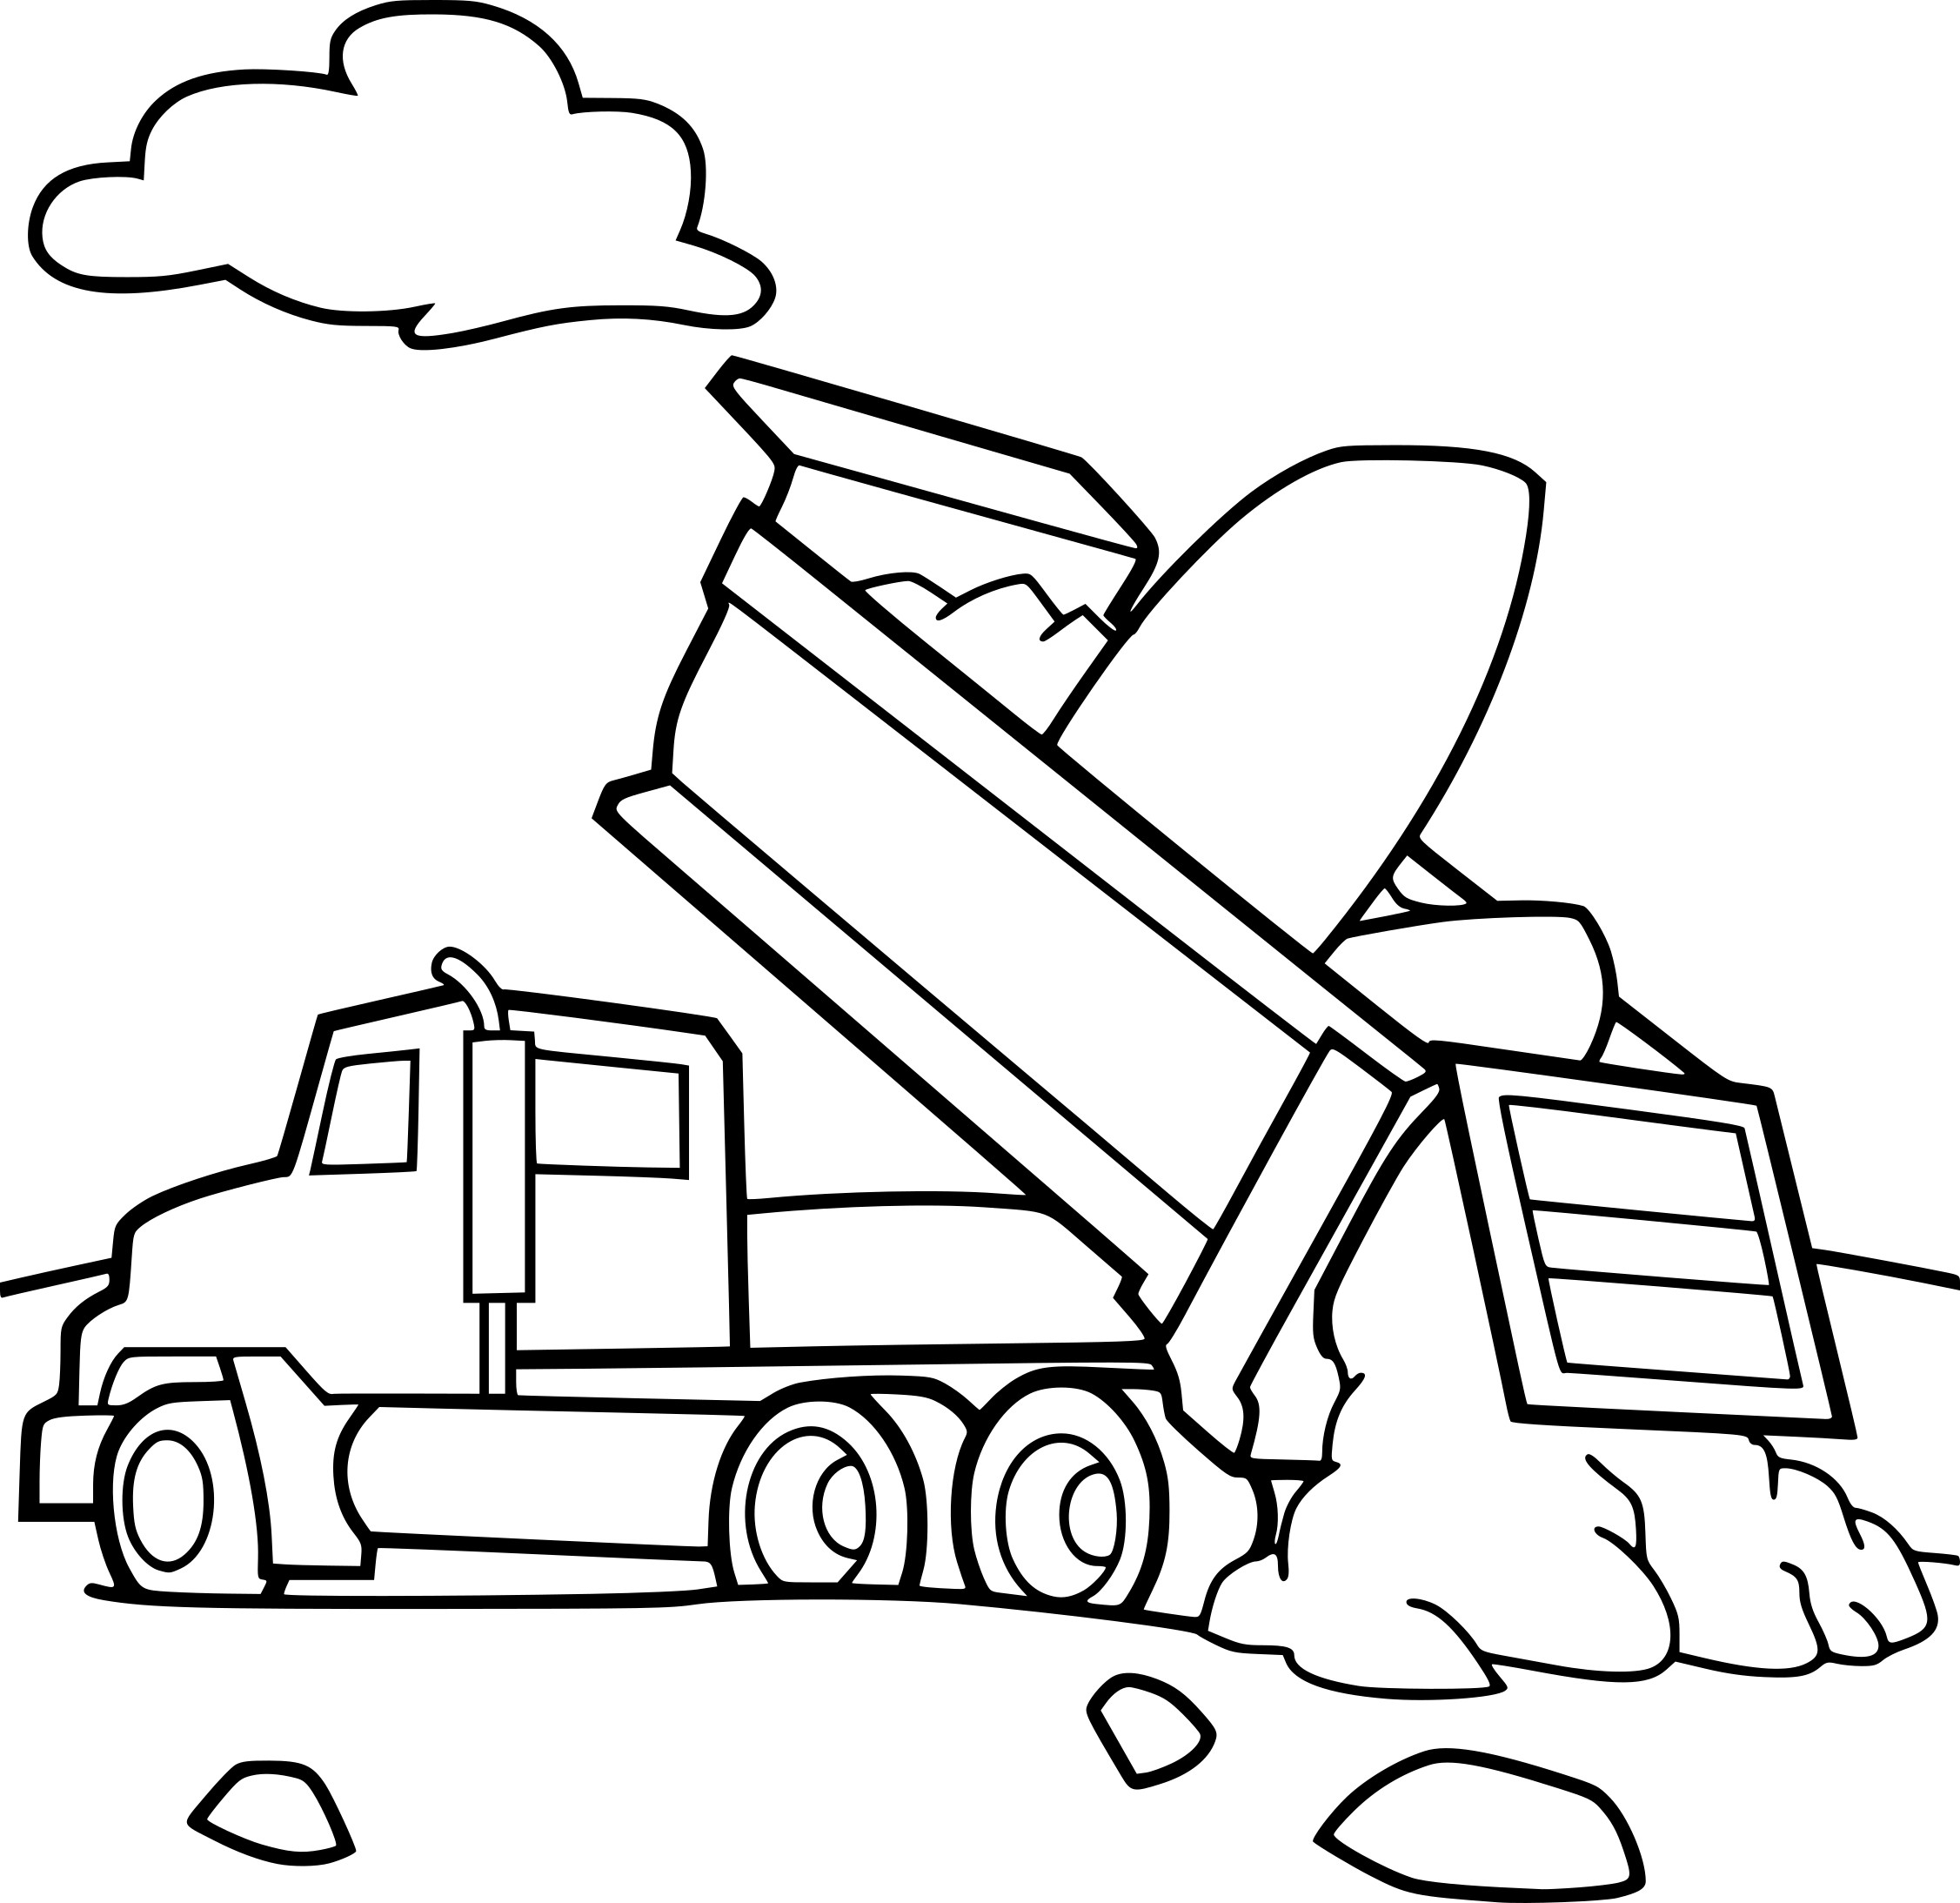 Garbage Truck drawing and coloring page